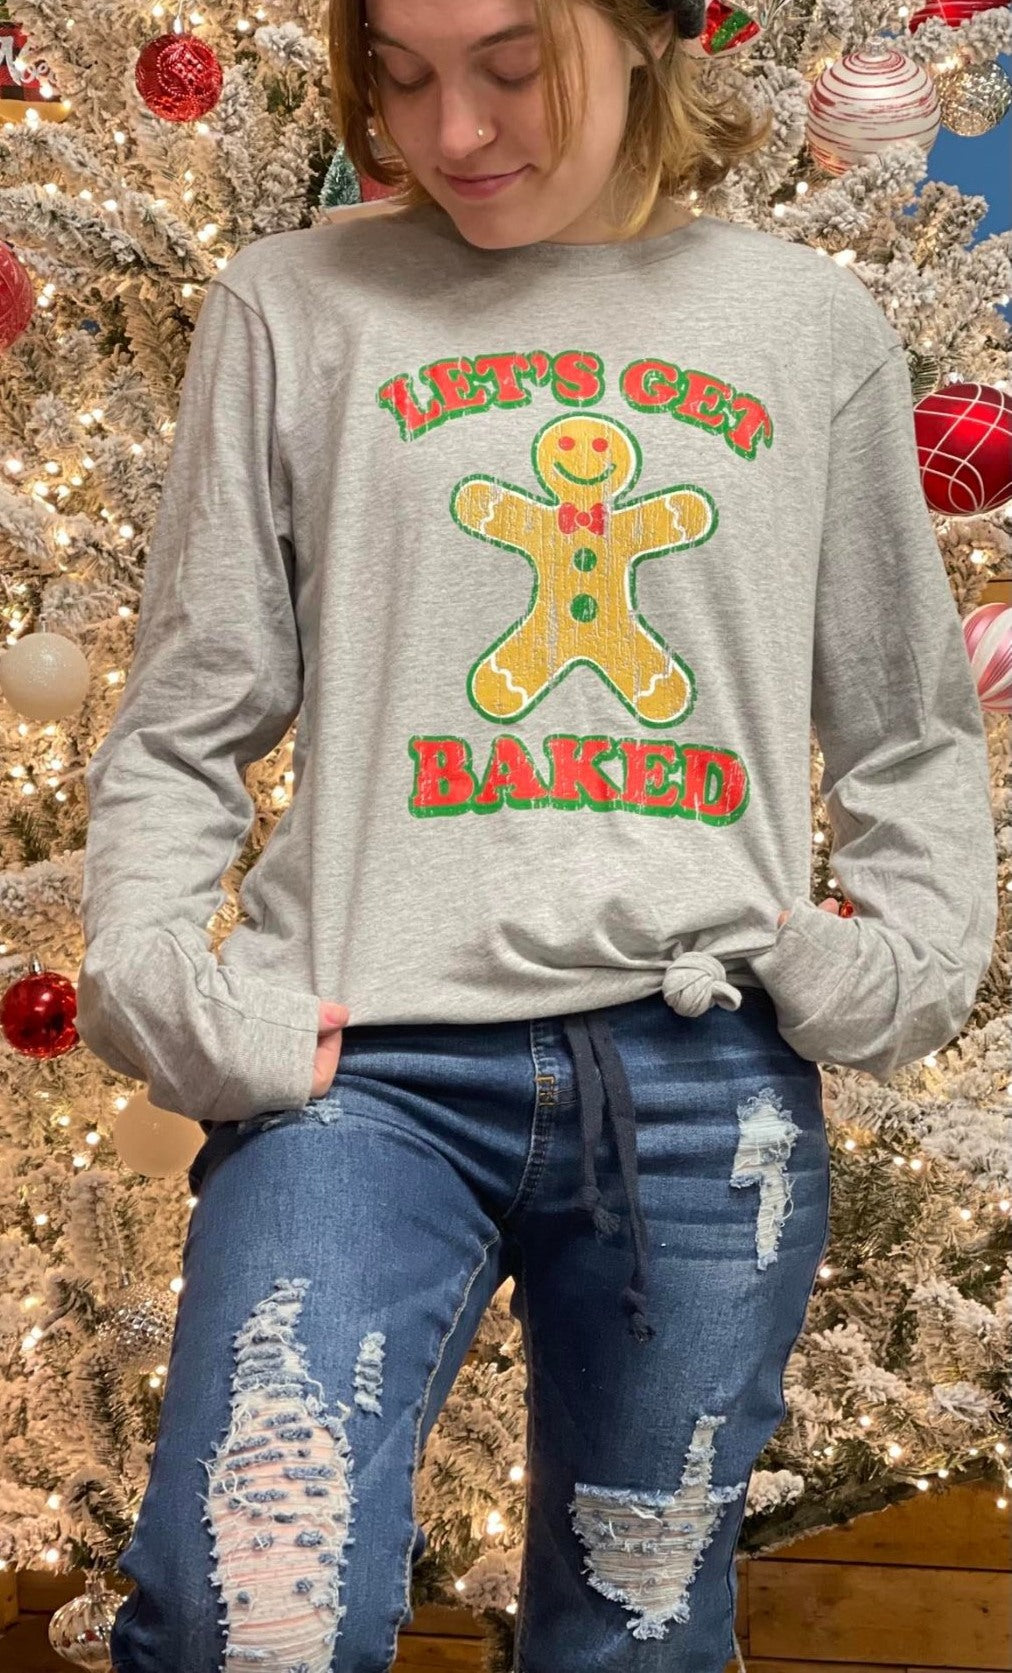 Let's Get Baked Long Sleeve Tee